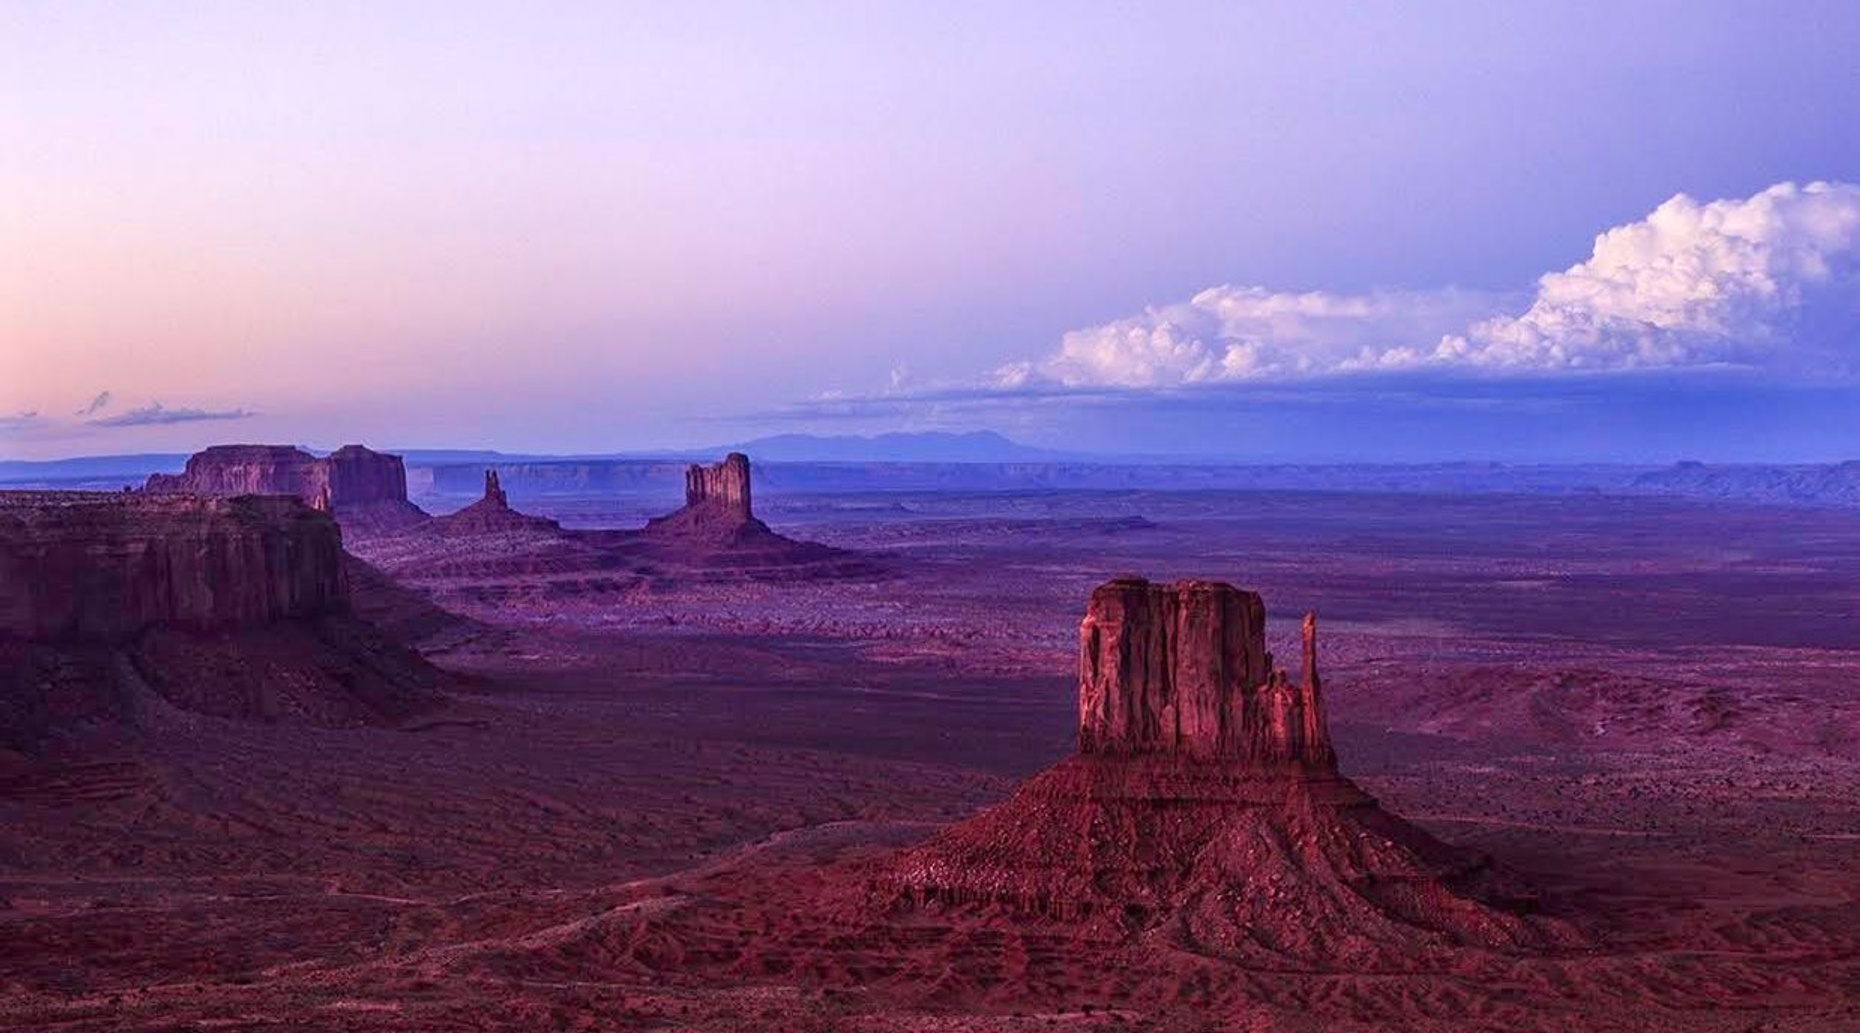 1.5 Hour Guided Tour of the Oljato-Monument Valley